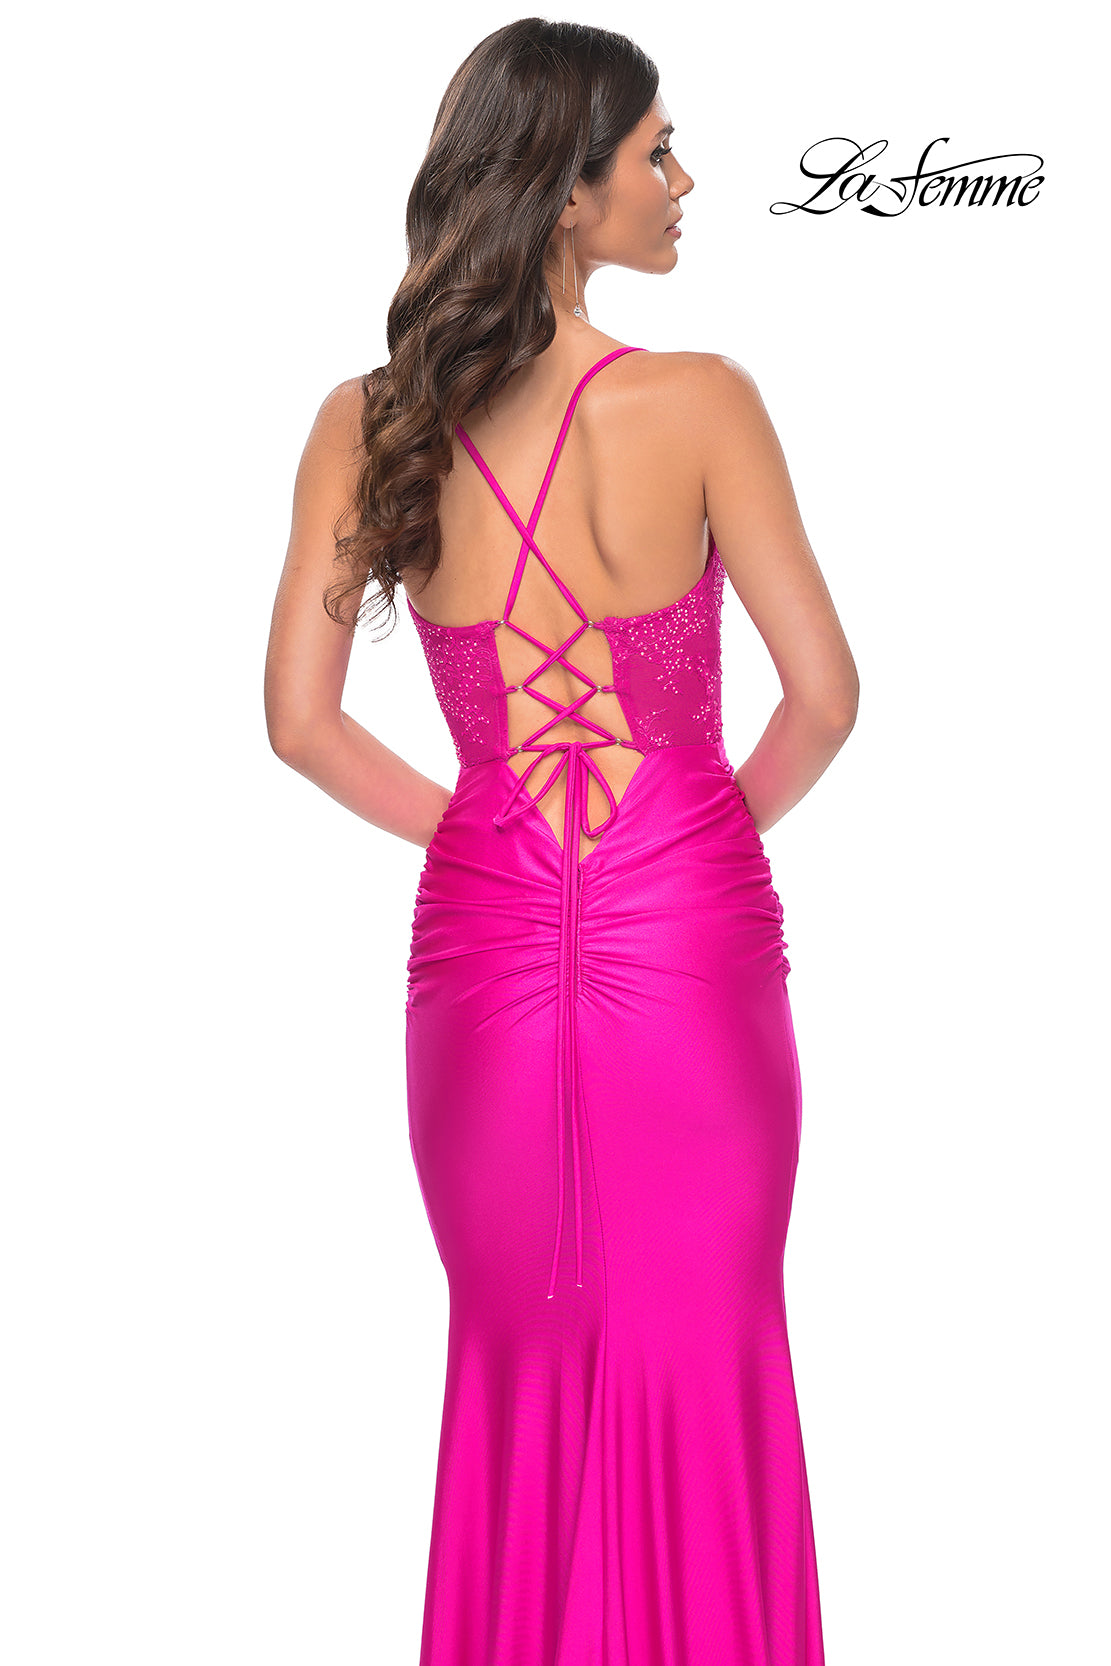 La-Femme-32322-Square-Neckline-Lace-up-Back-Ruched-Jersey-Fitted-Hot-Fuchsia-Evening-Dress-B-Chic-Fashions-Prom-Dress